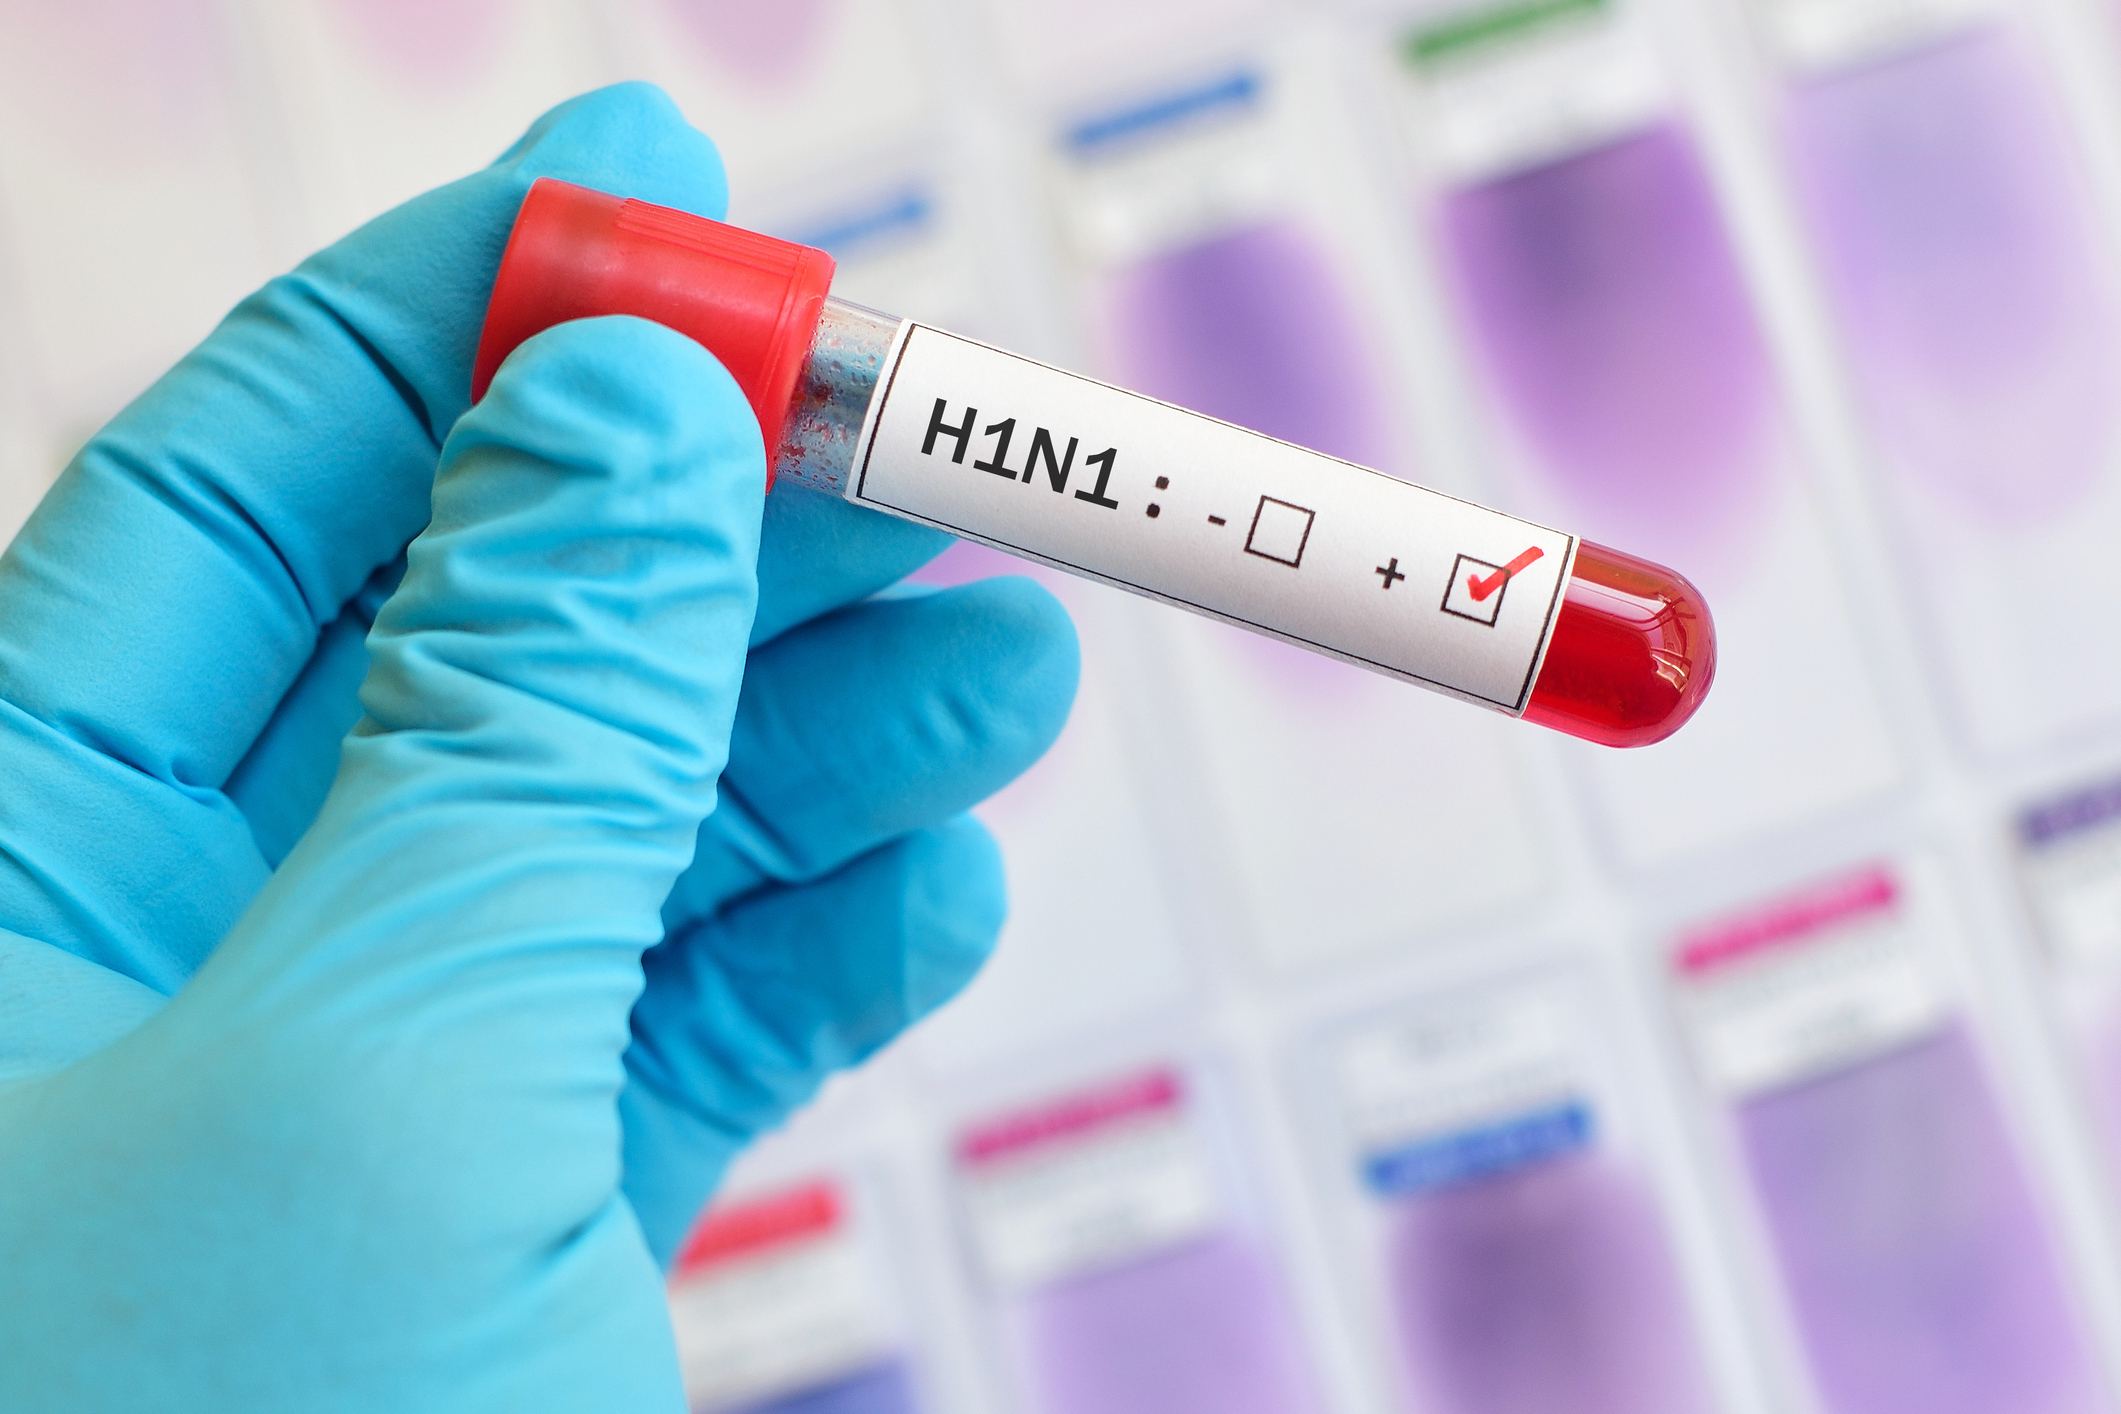 Swine flu, or H1N1 flu, is caused by a strain of the influenza family of viruses that is endemic in pigs.